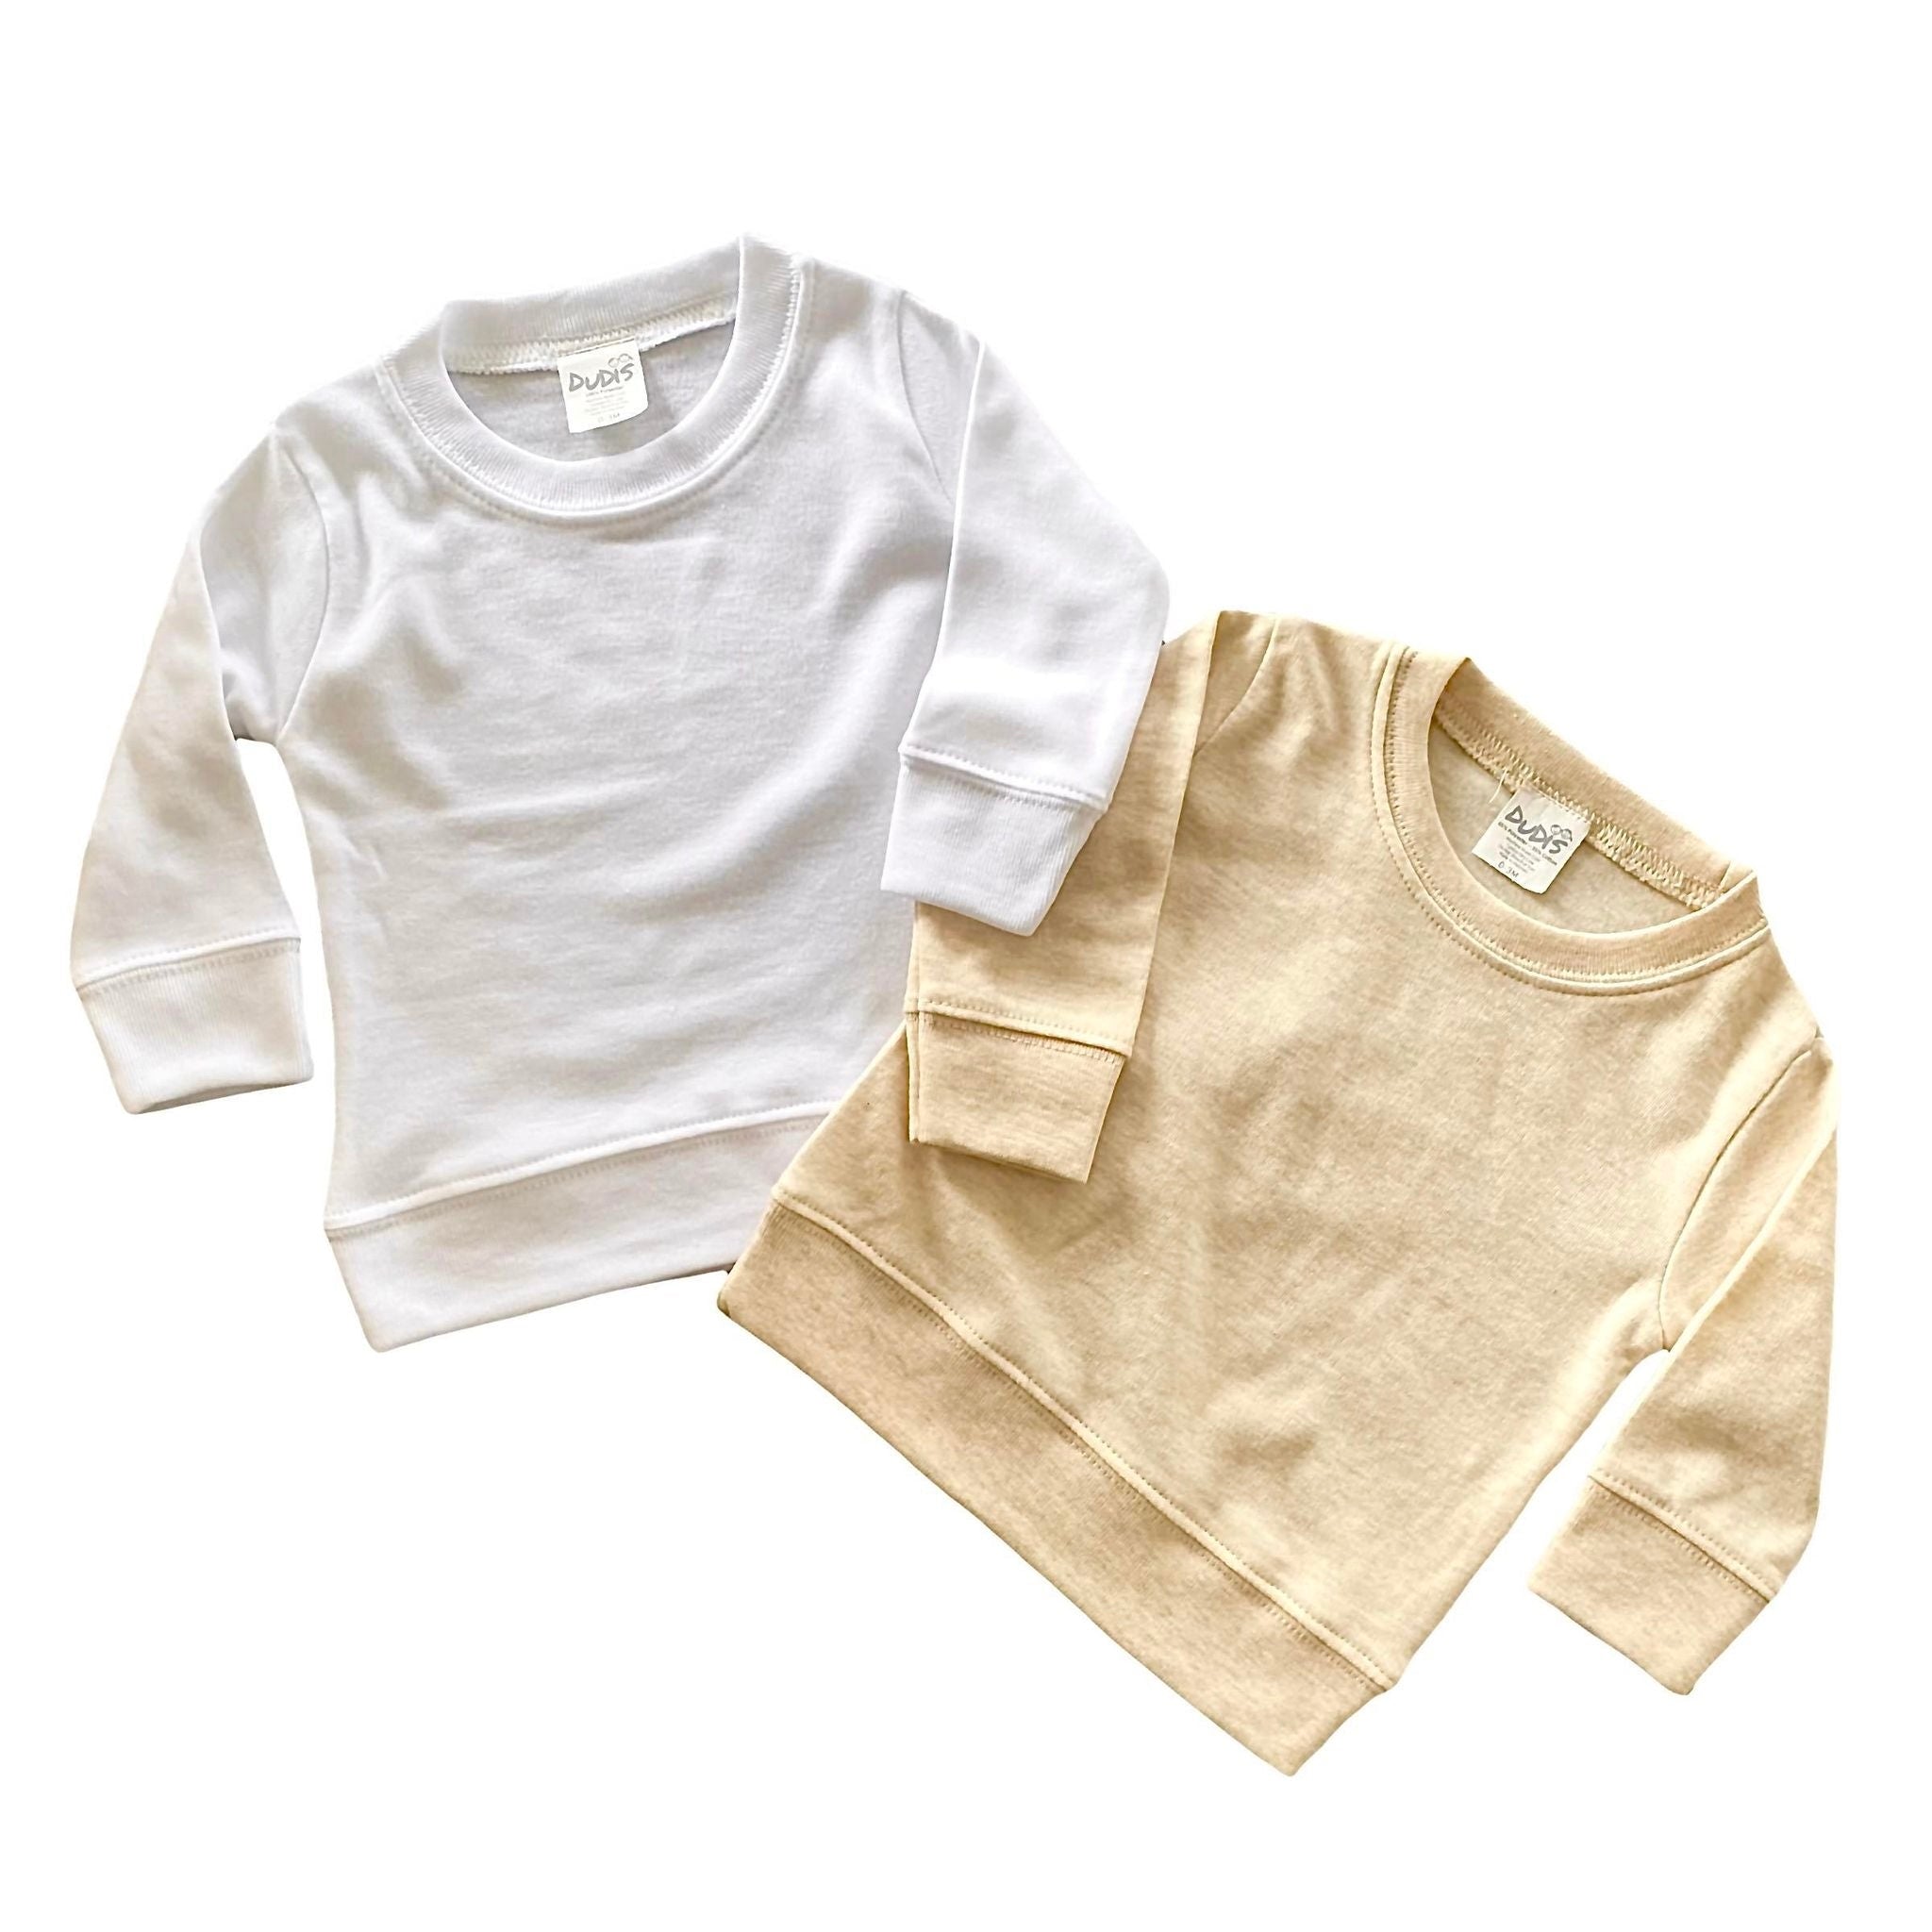 white and cream baby pullovers